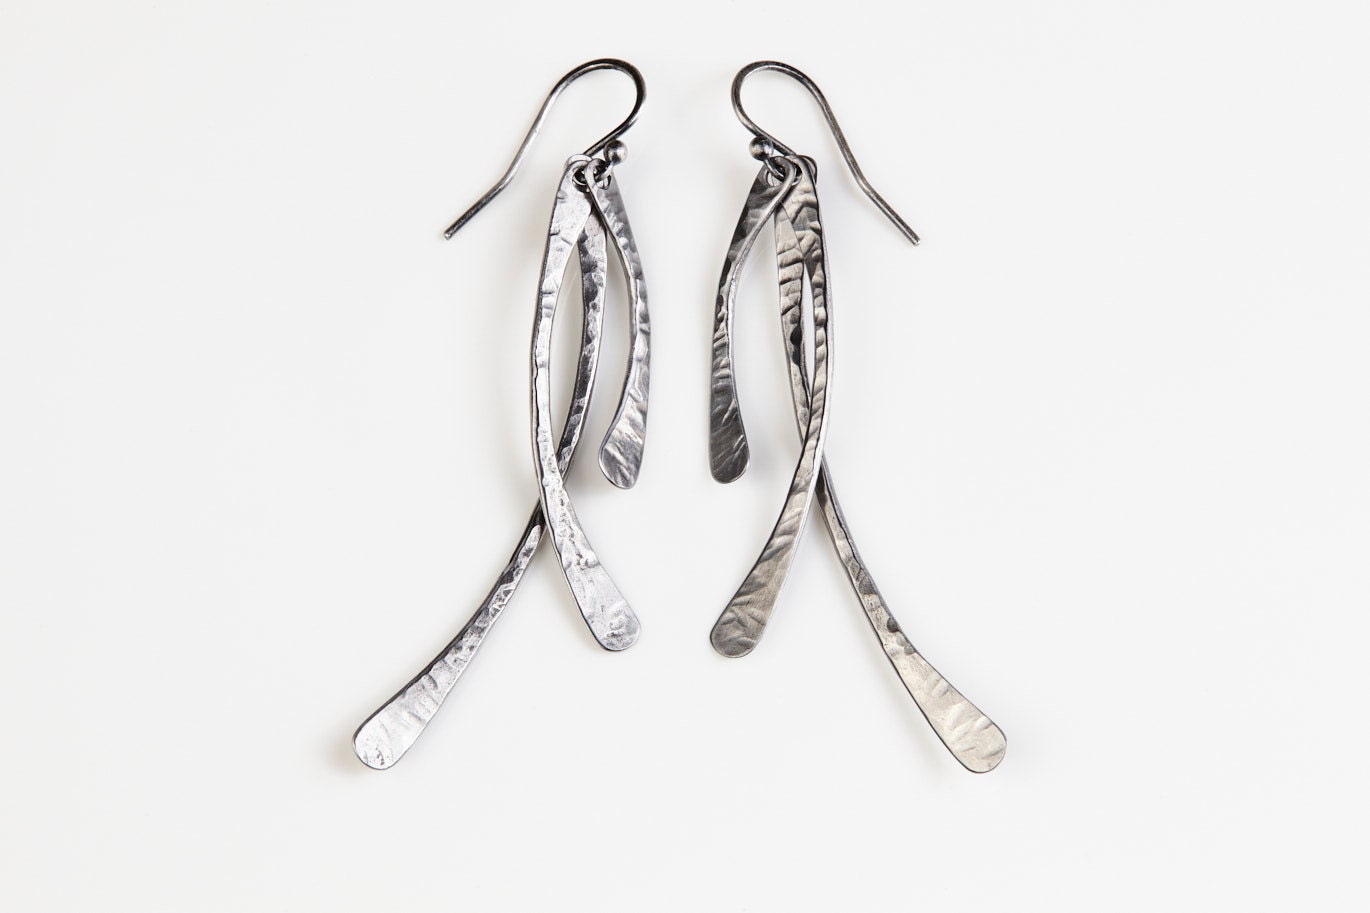 Rustic, Hand Forged Iron Earrings. A Unique 6th Anniversary Gift for ...